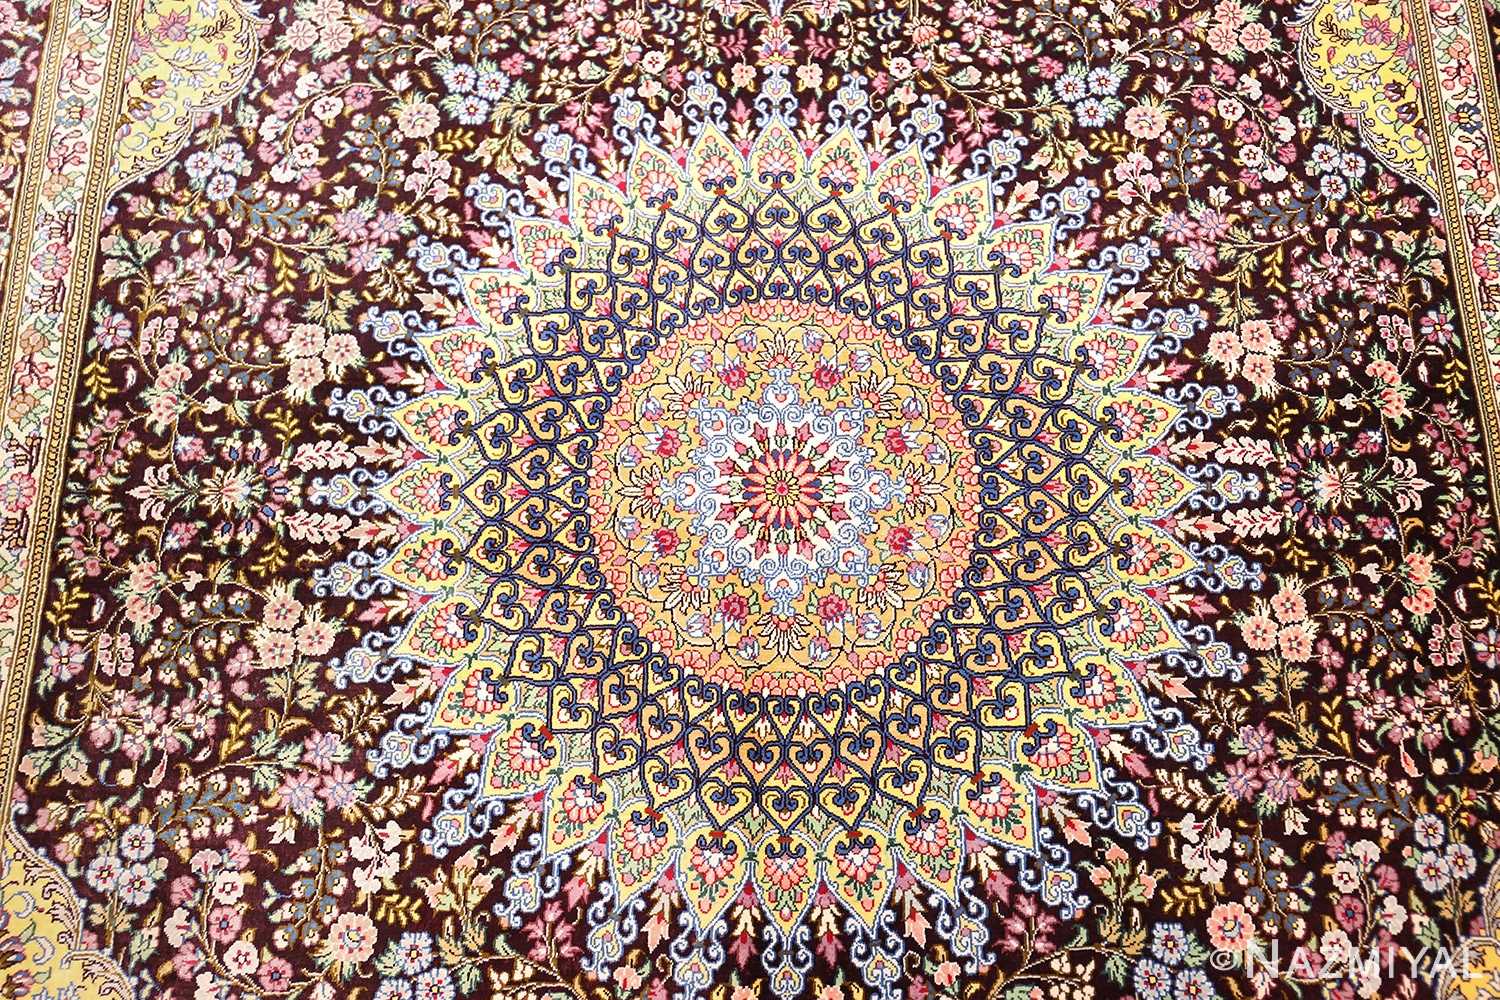 Small and Fine Persian Floral Silk Qum Rug 49416 Nazmiyal Antique Rugs